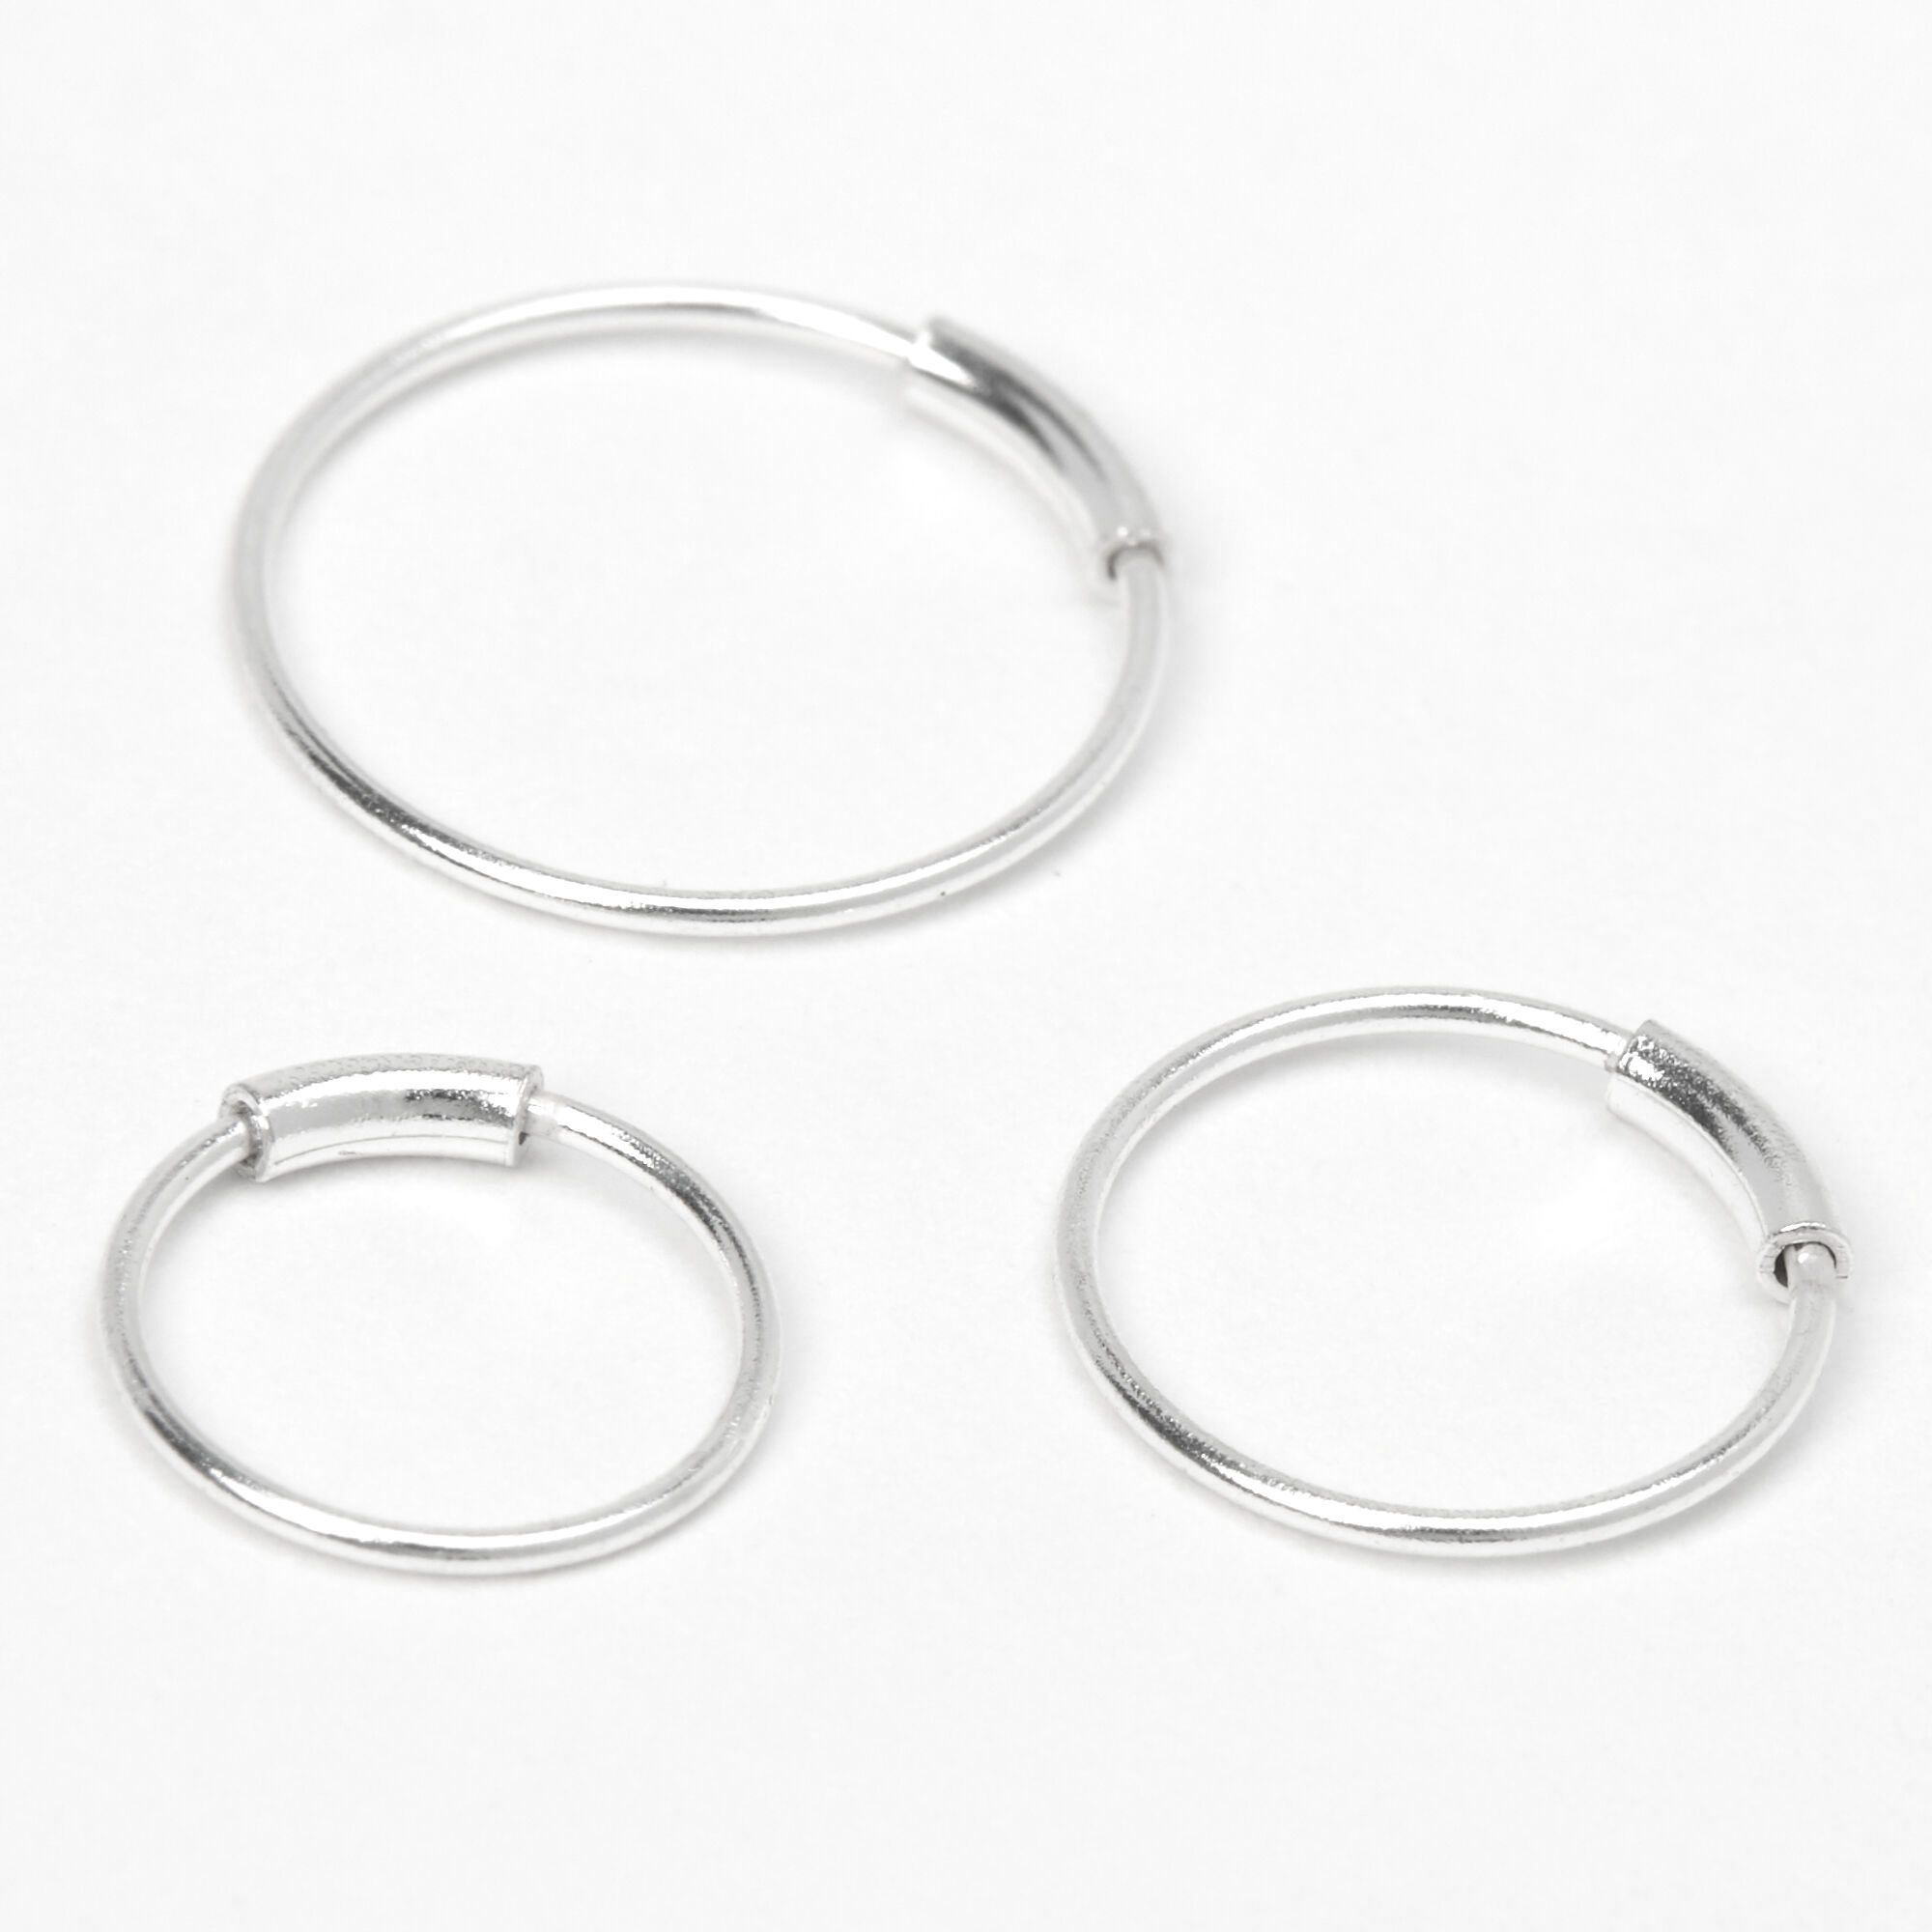 View Claires 22G Graduated Bar Hoop Nose Rings 3 Pack Silver information